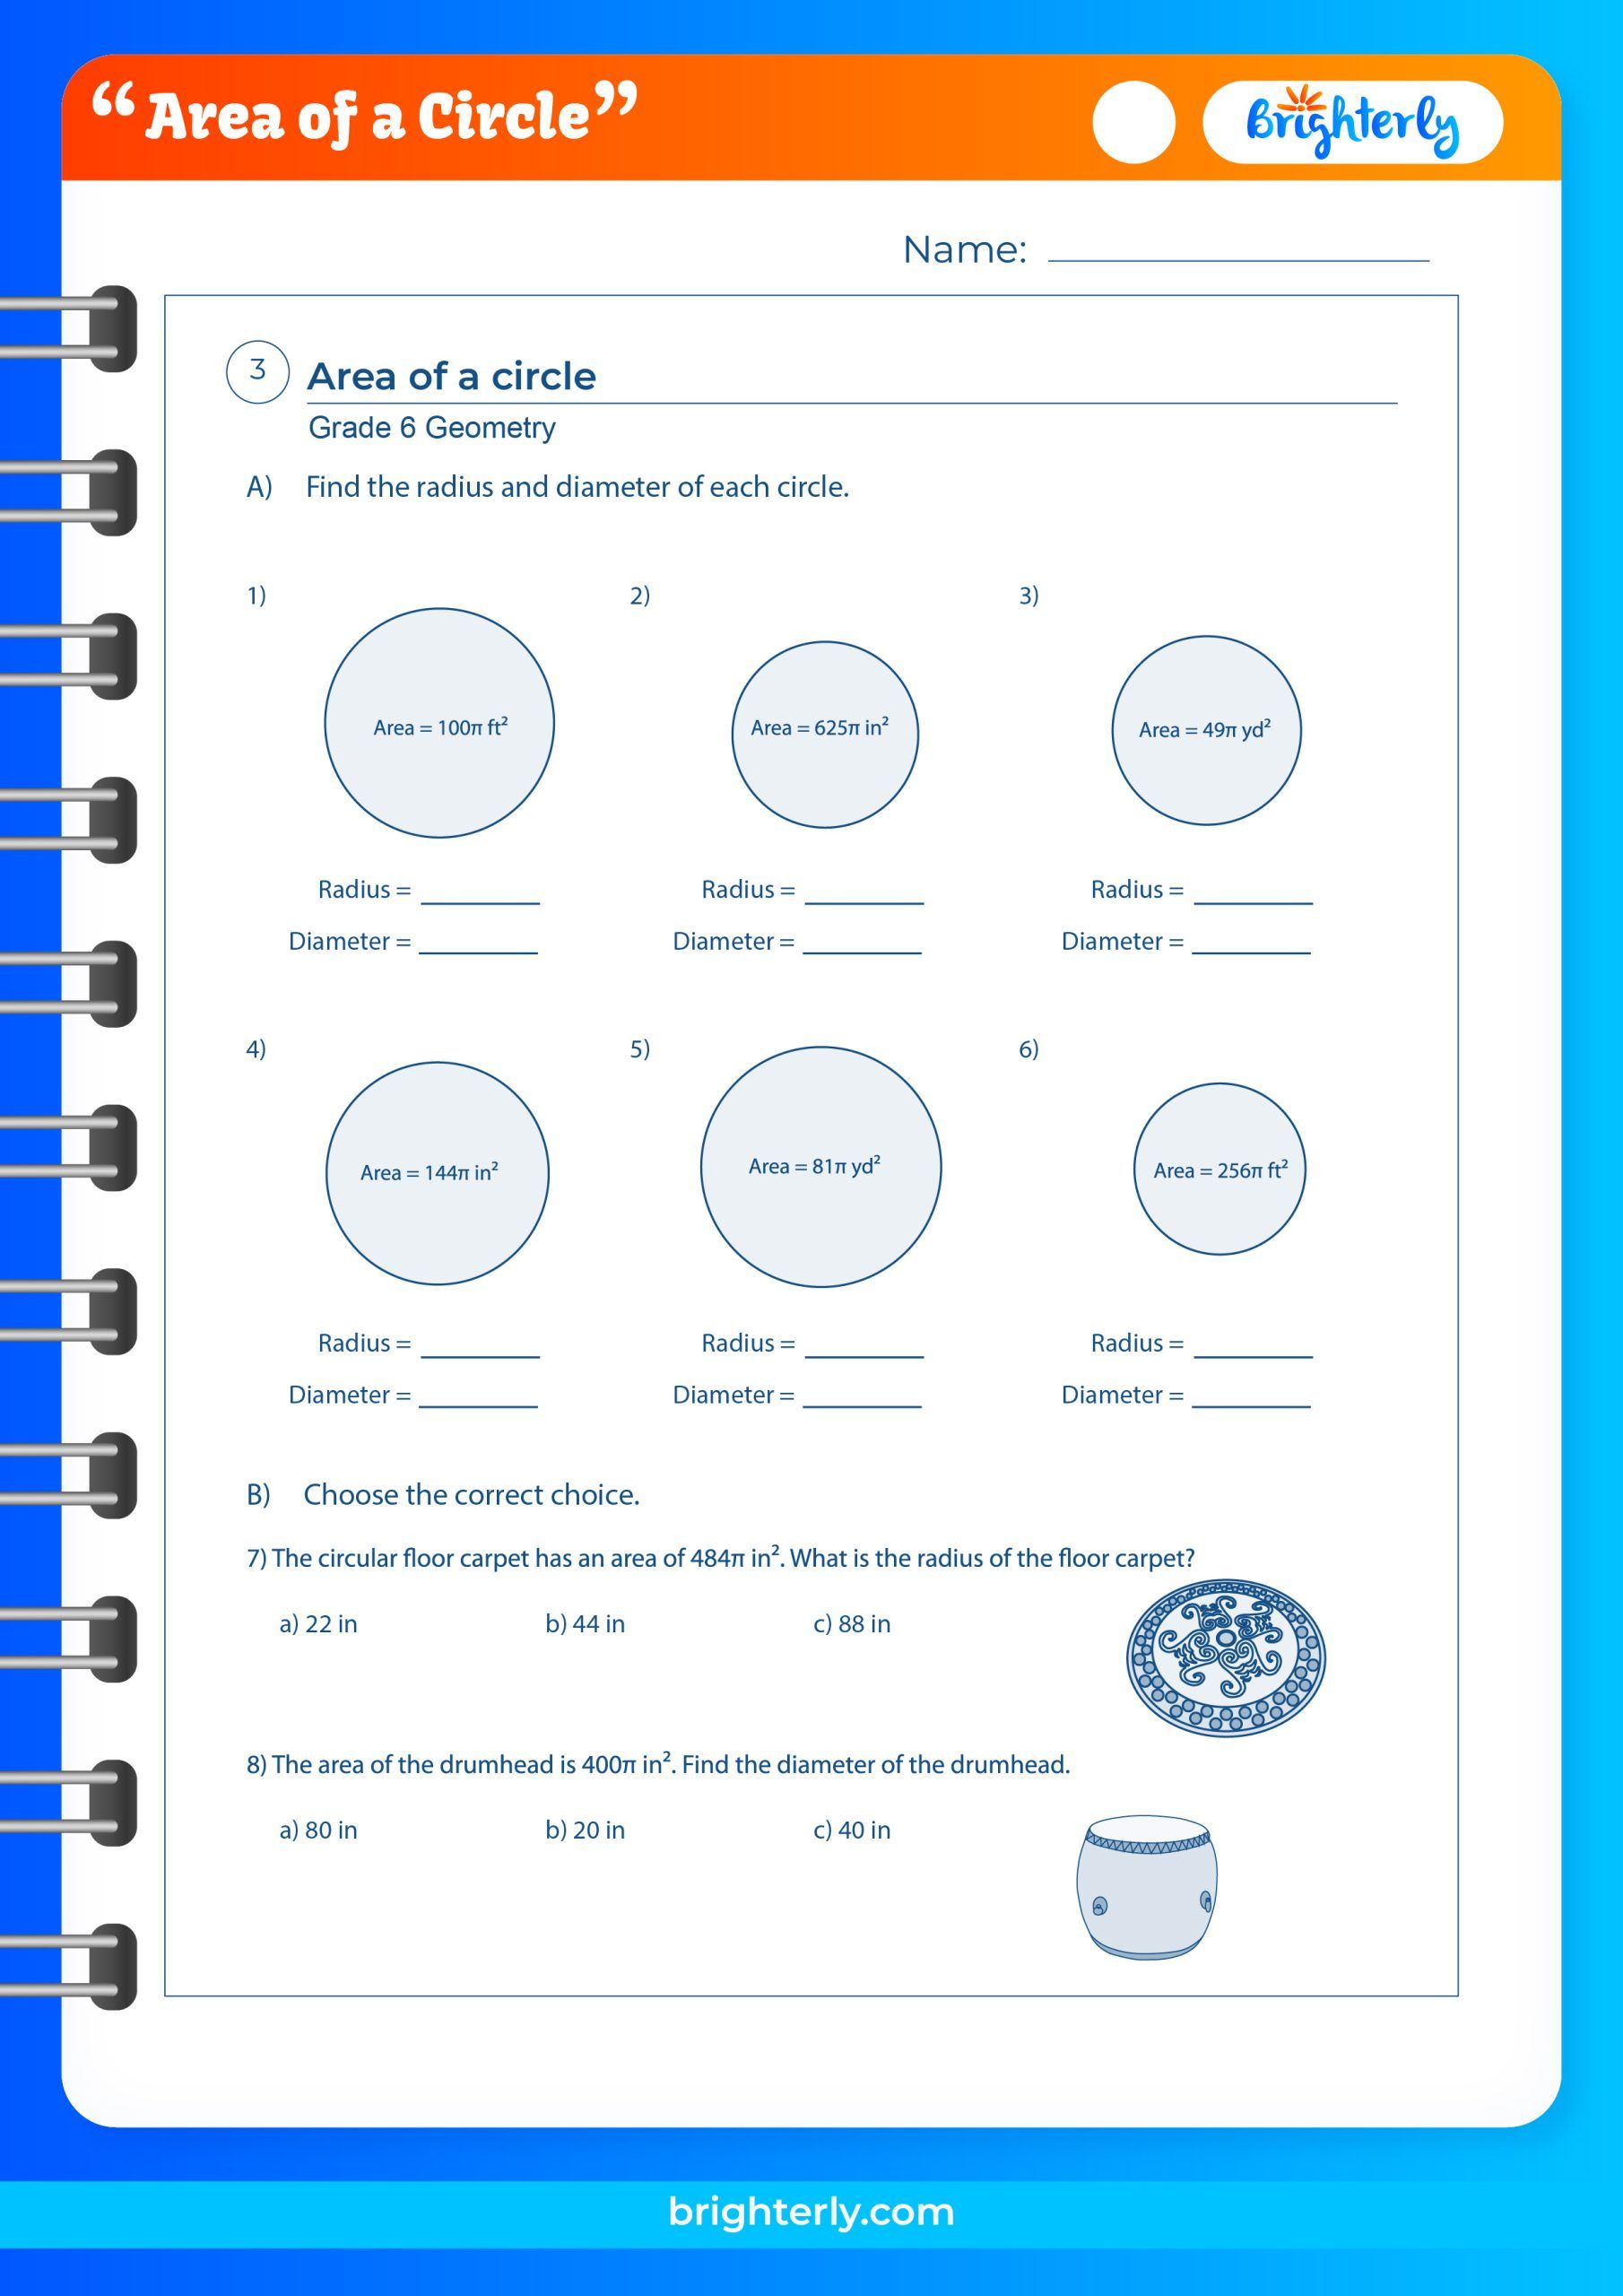 free-printable-area-of-a-circle-worksheets-pdfs-brighterly